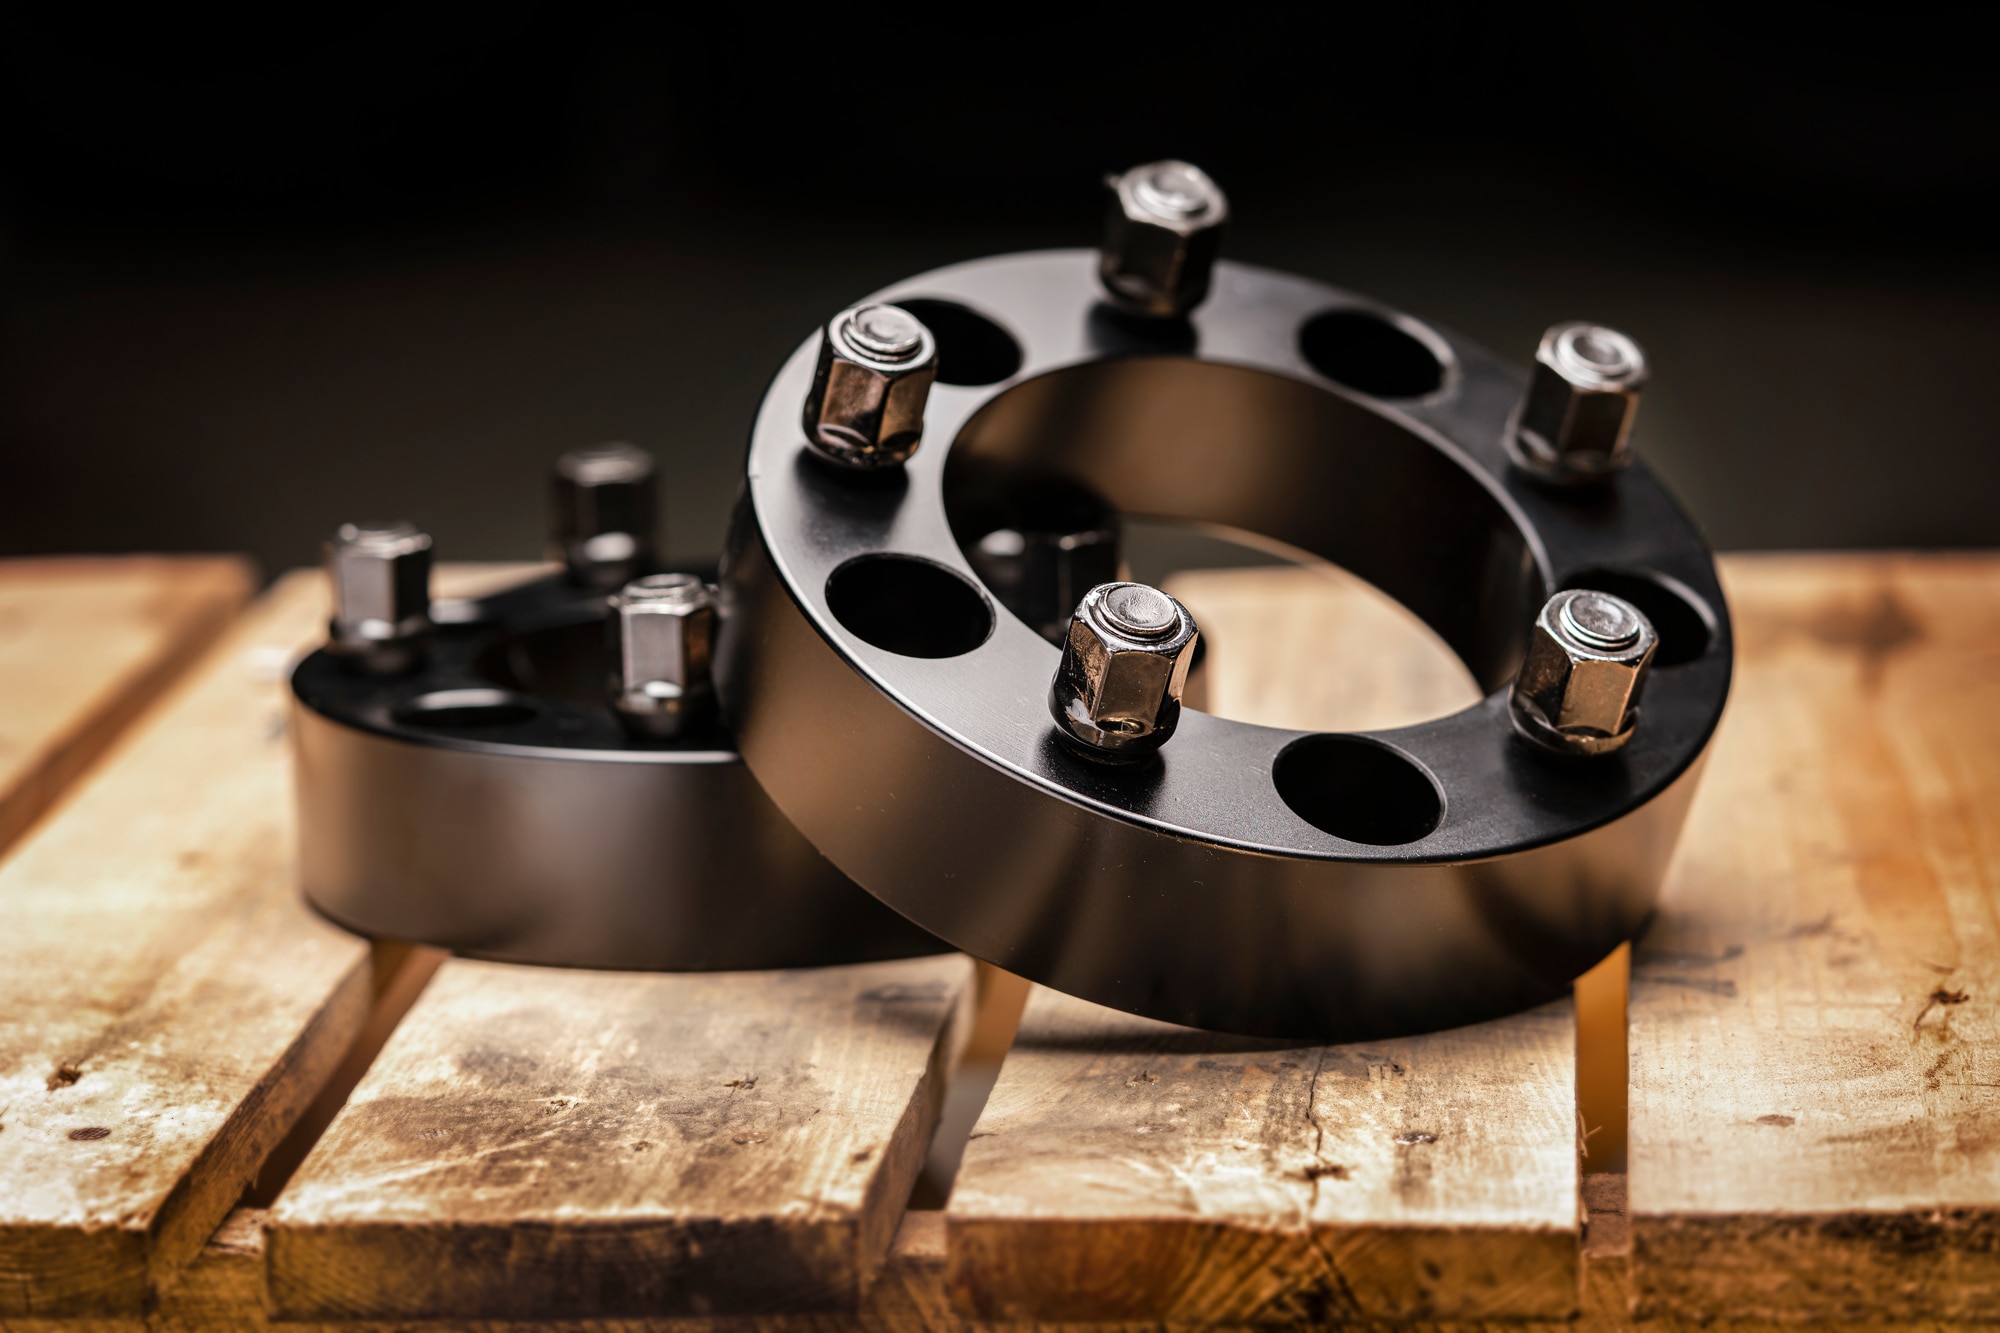 Hub/wheel spacers on a wooden table with black background